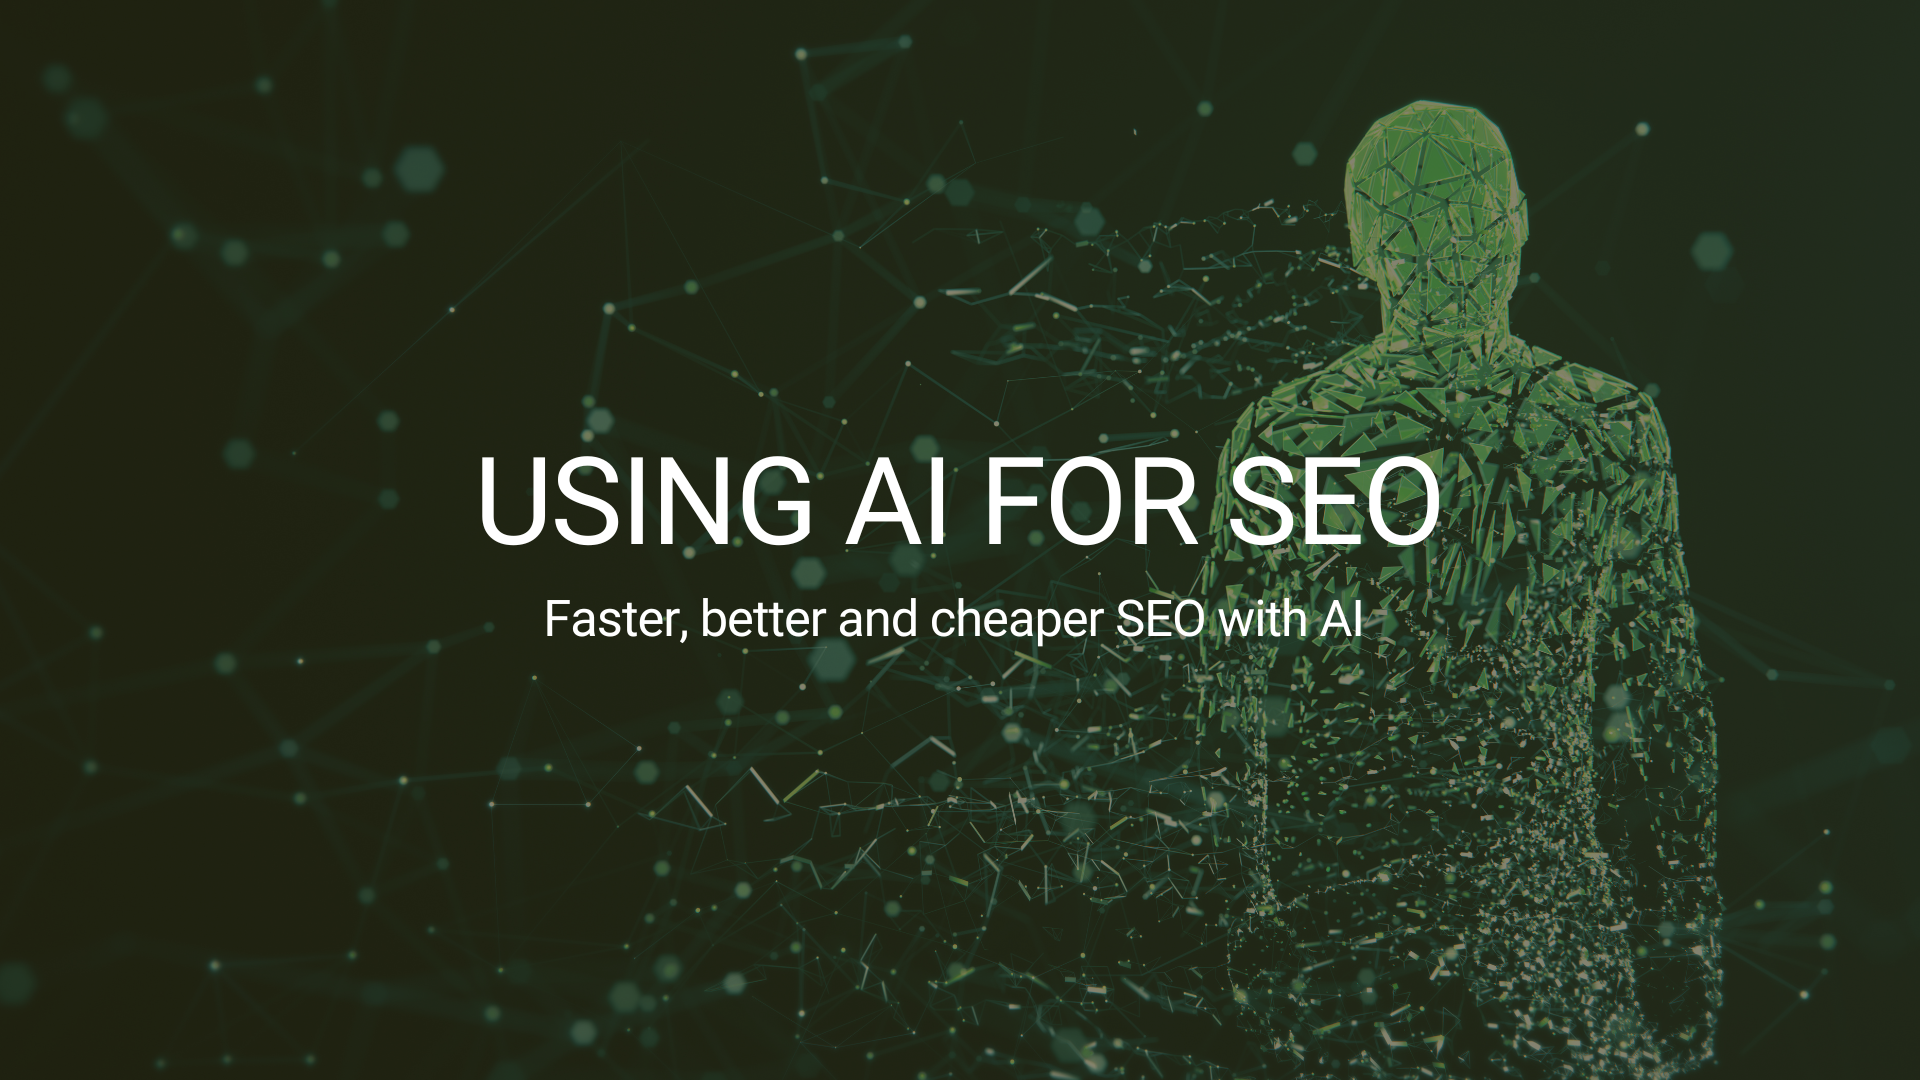 SEO using AI is cheaper, faster and better, background with a humanoid.